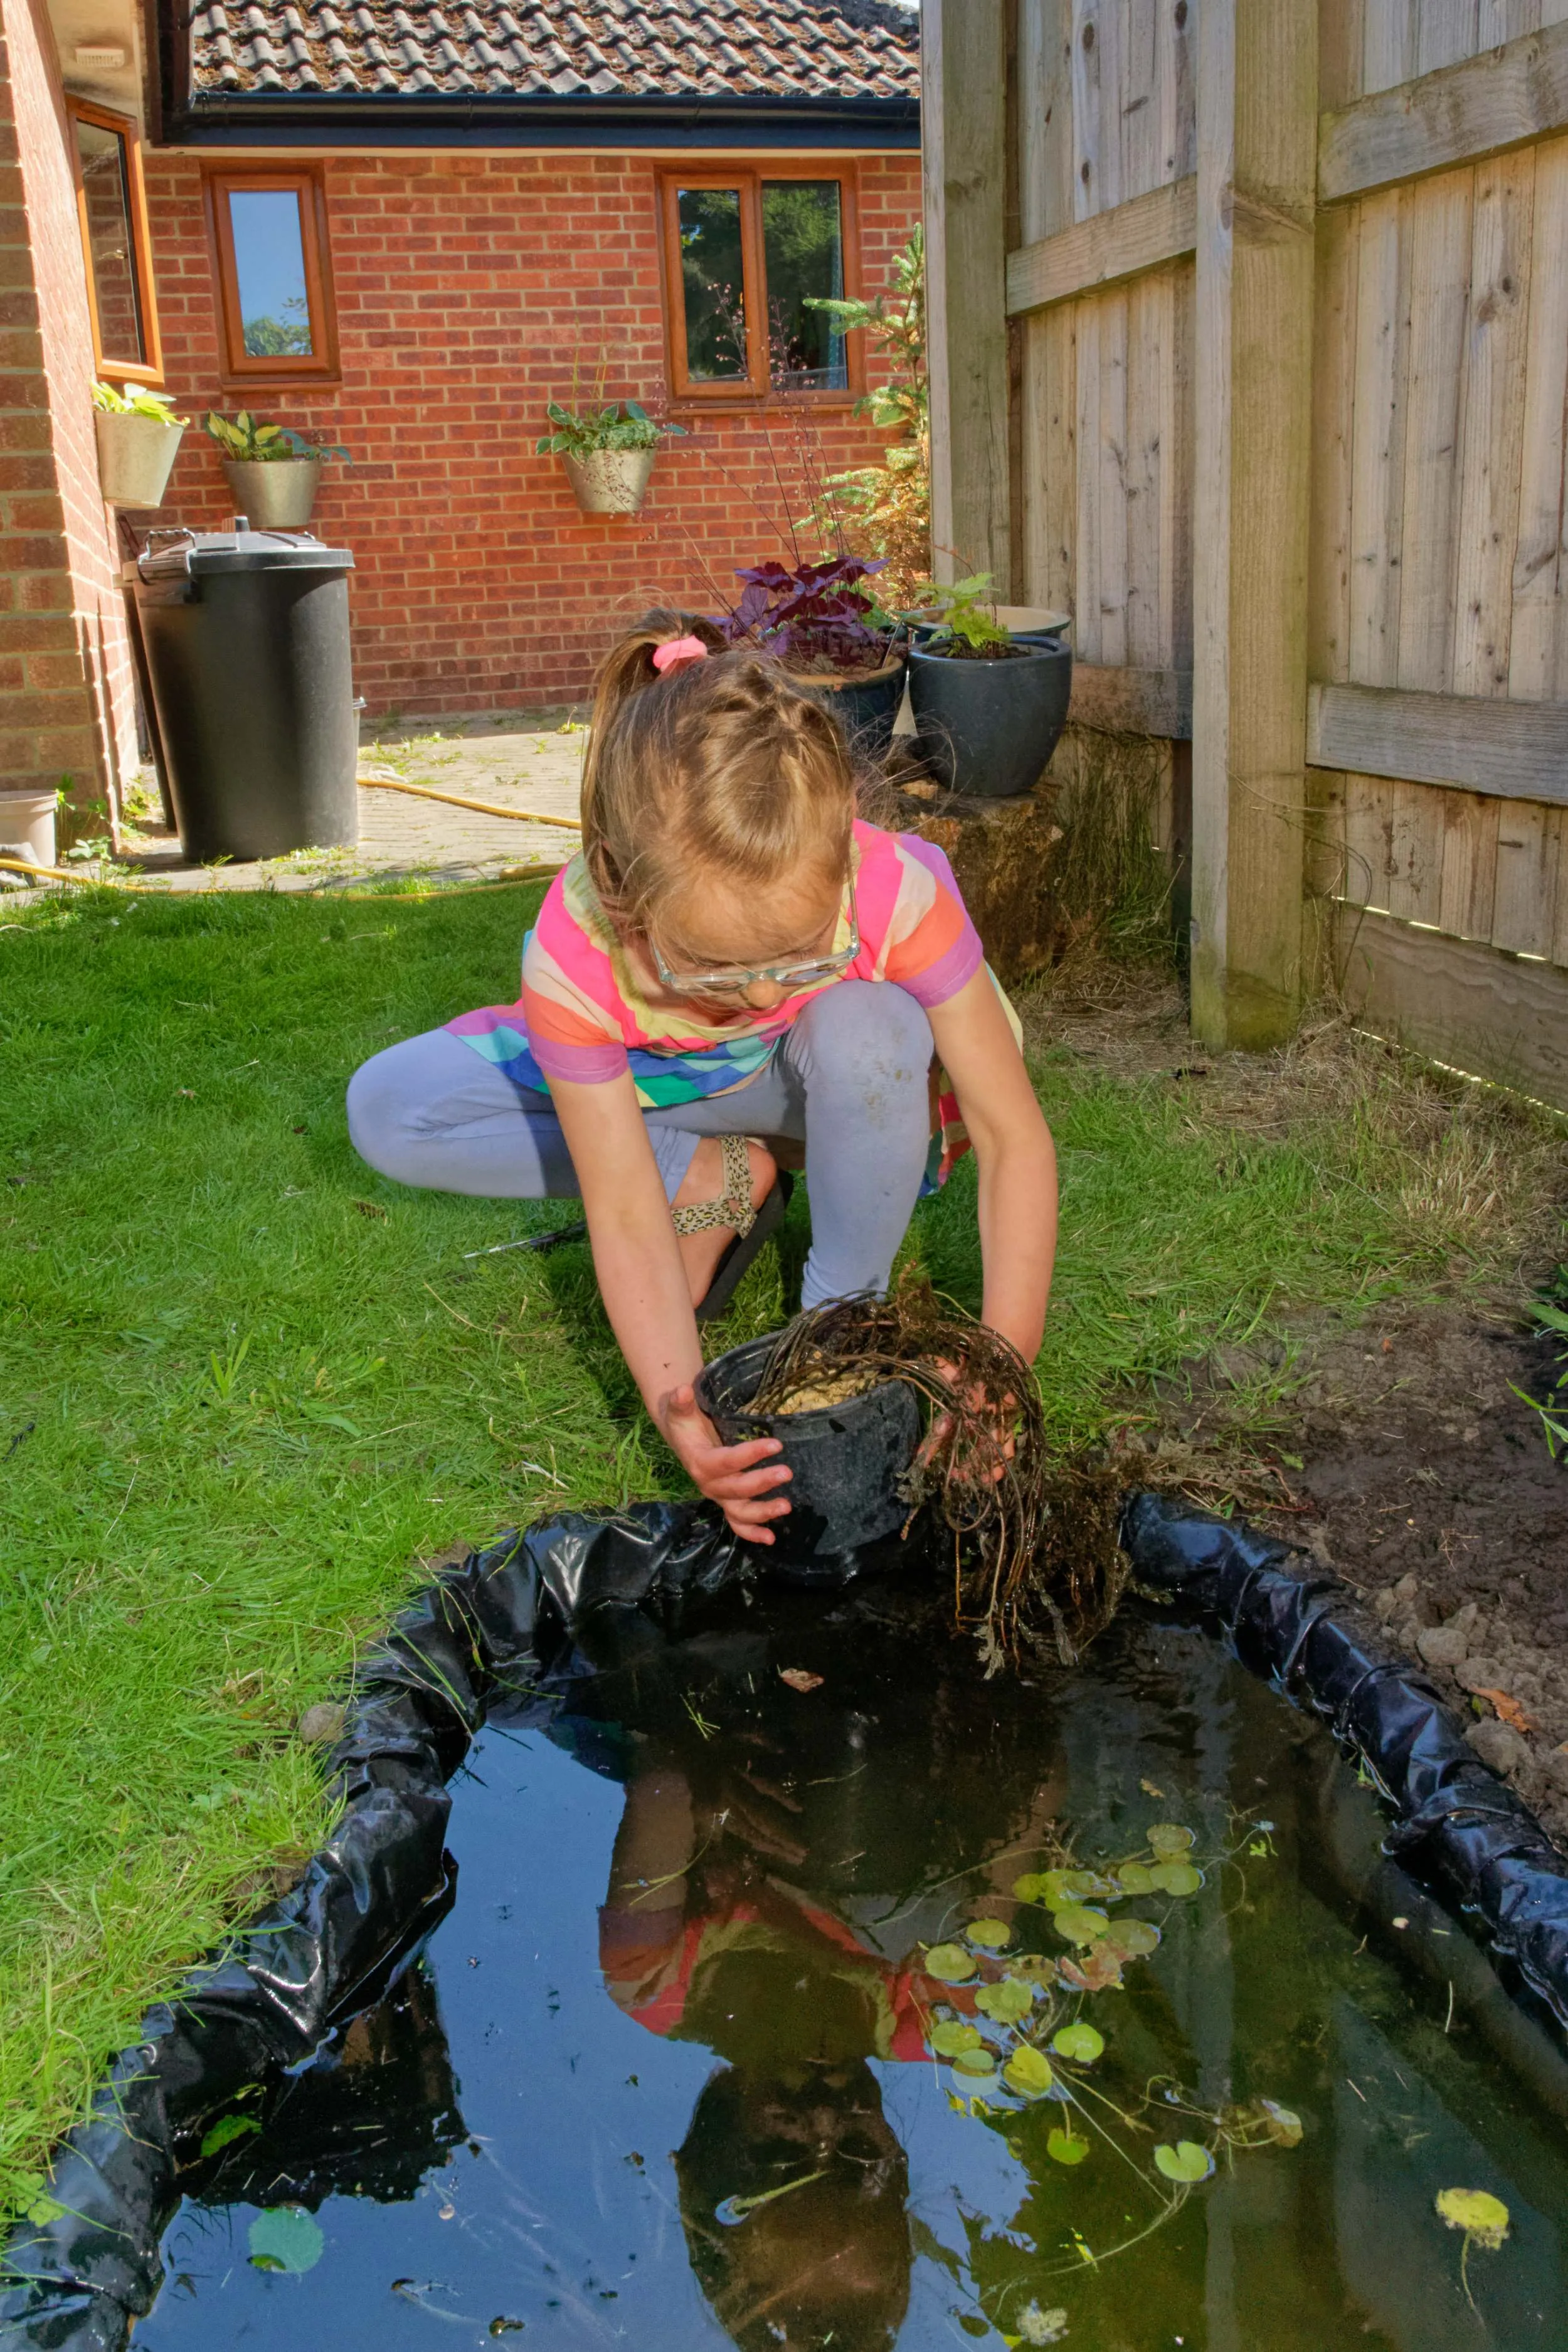 A child placing a plant pot into the water at the edge of a wildlife pond.